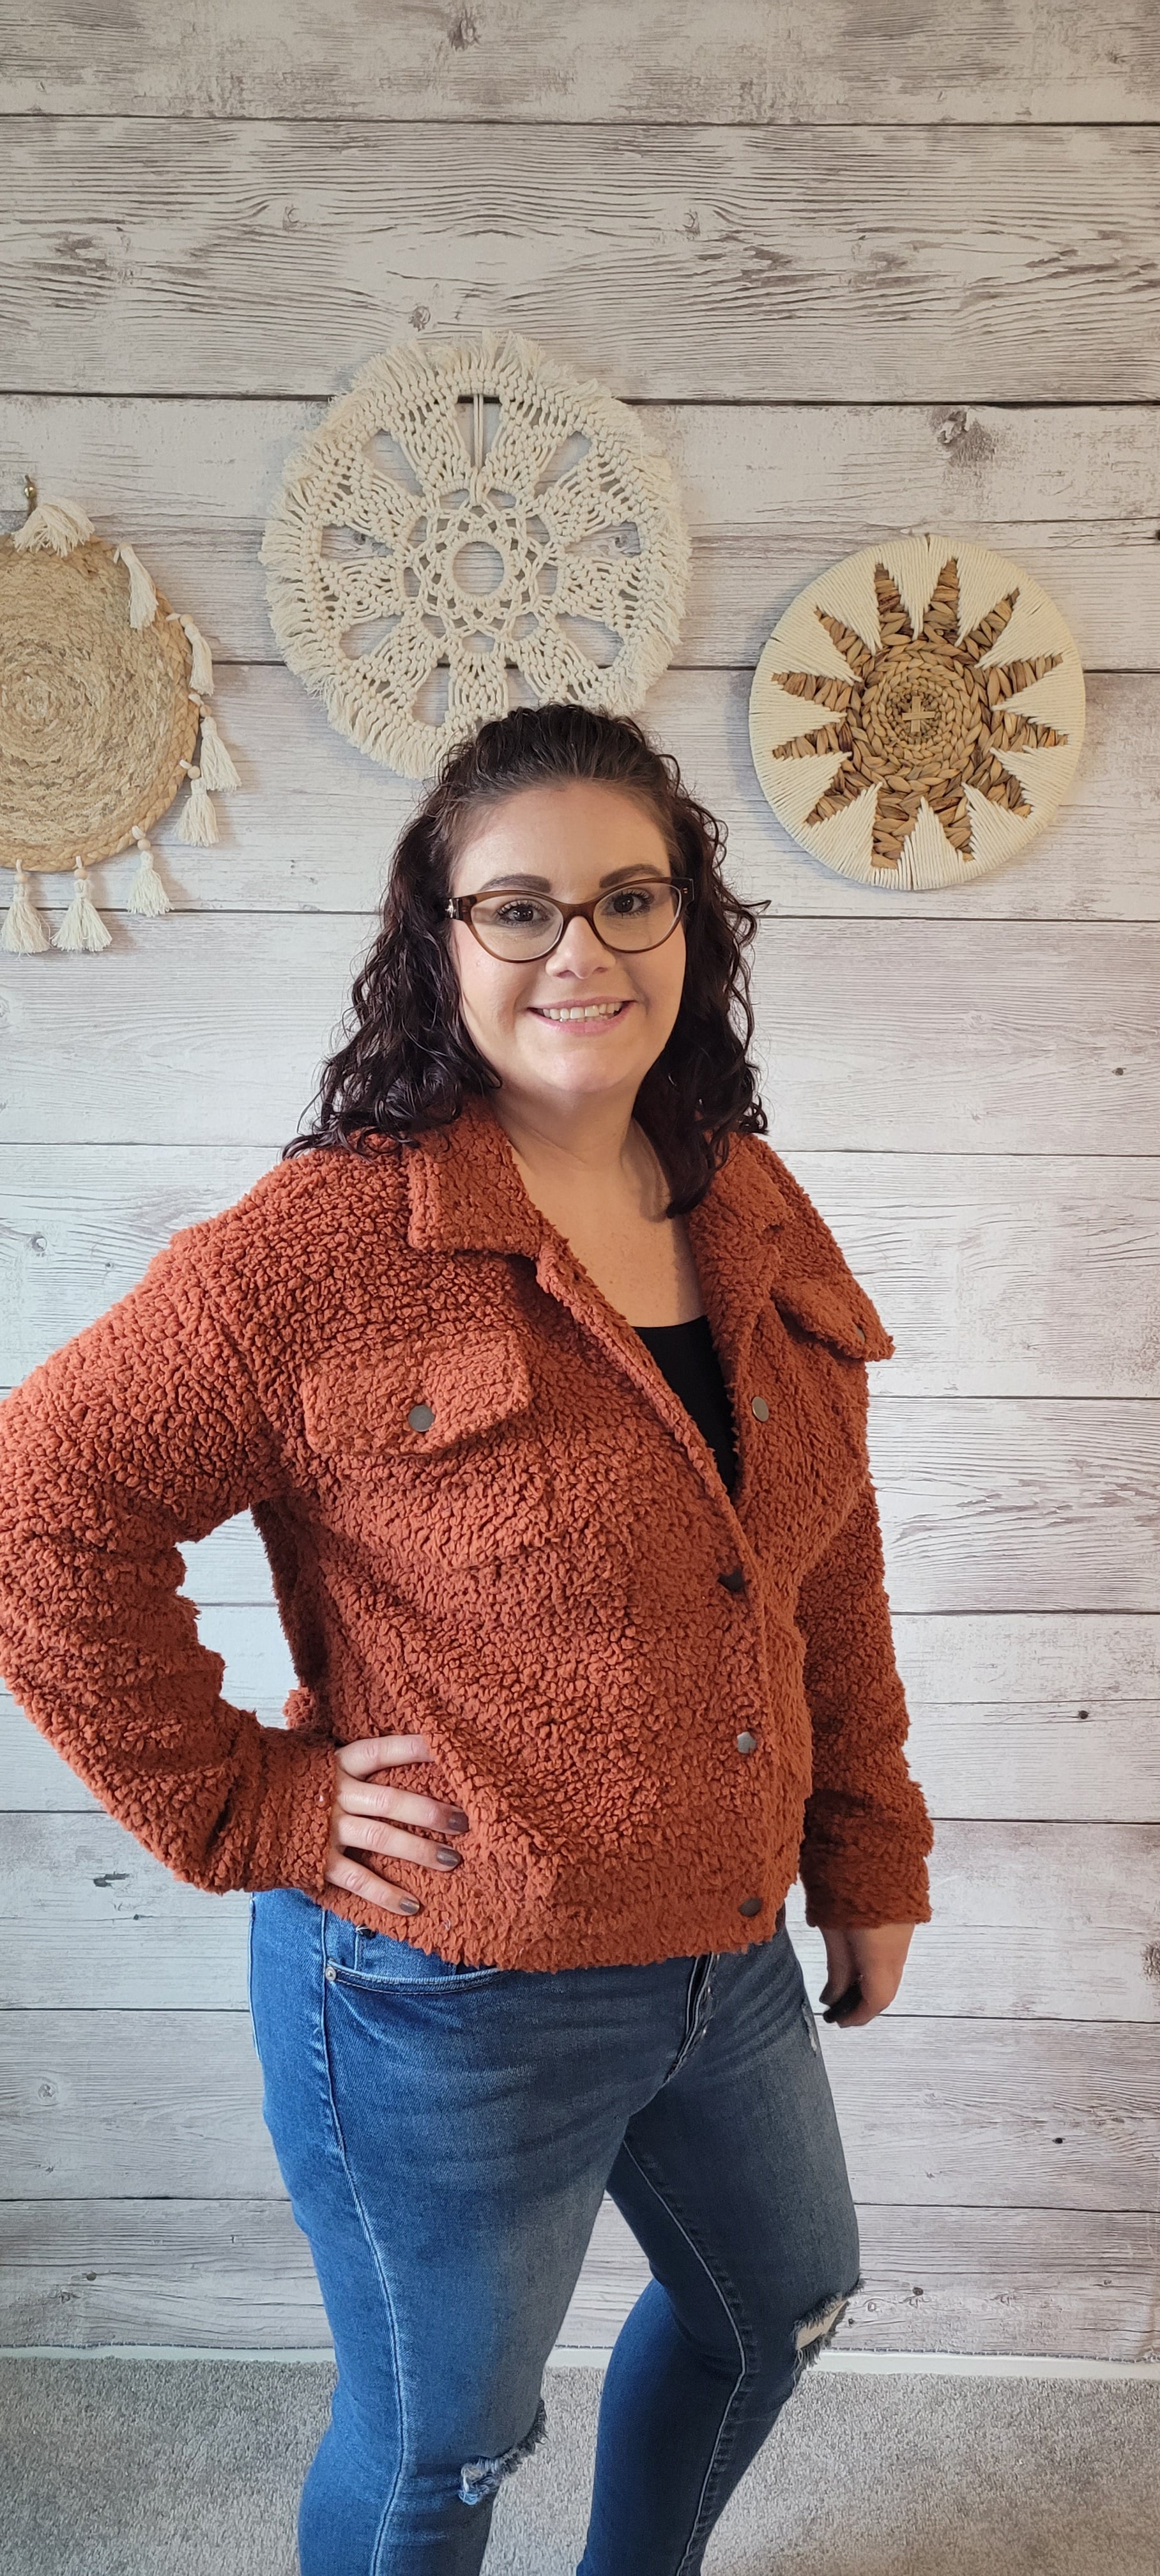 The perfect winter companion has arrived! Look no further than this "Marley Rust Fleece Jacket", featuring a button-down front closure and flap pockets to keep you cozy. Step out in style this season with a jacket that'll keep you looking fresh while beating the chill! Who could ask for more? Sizes small through large.